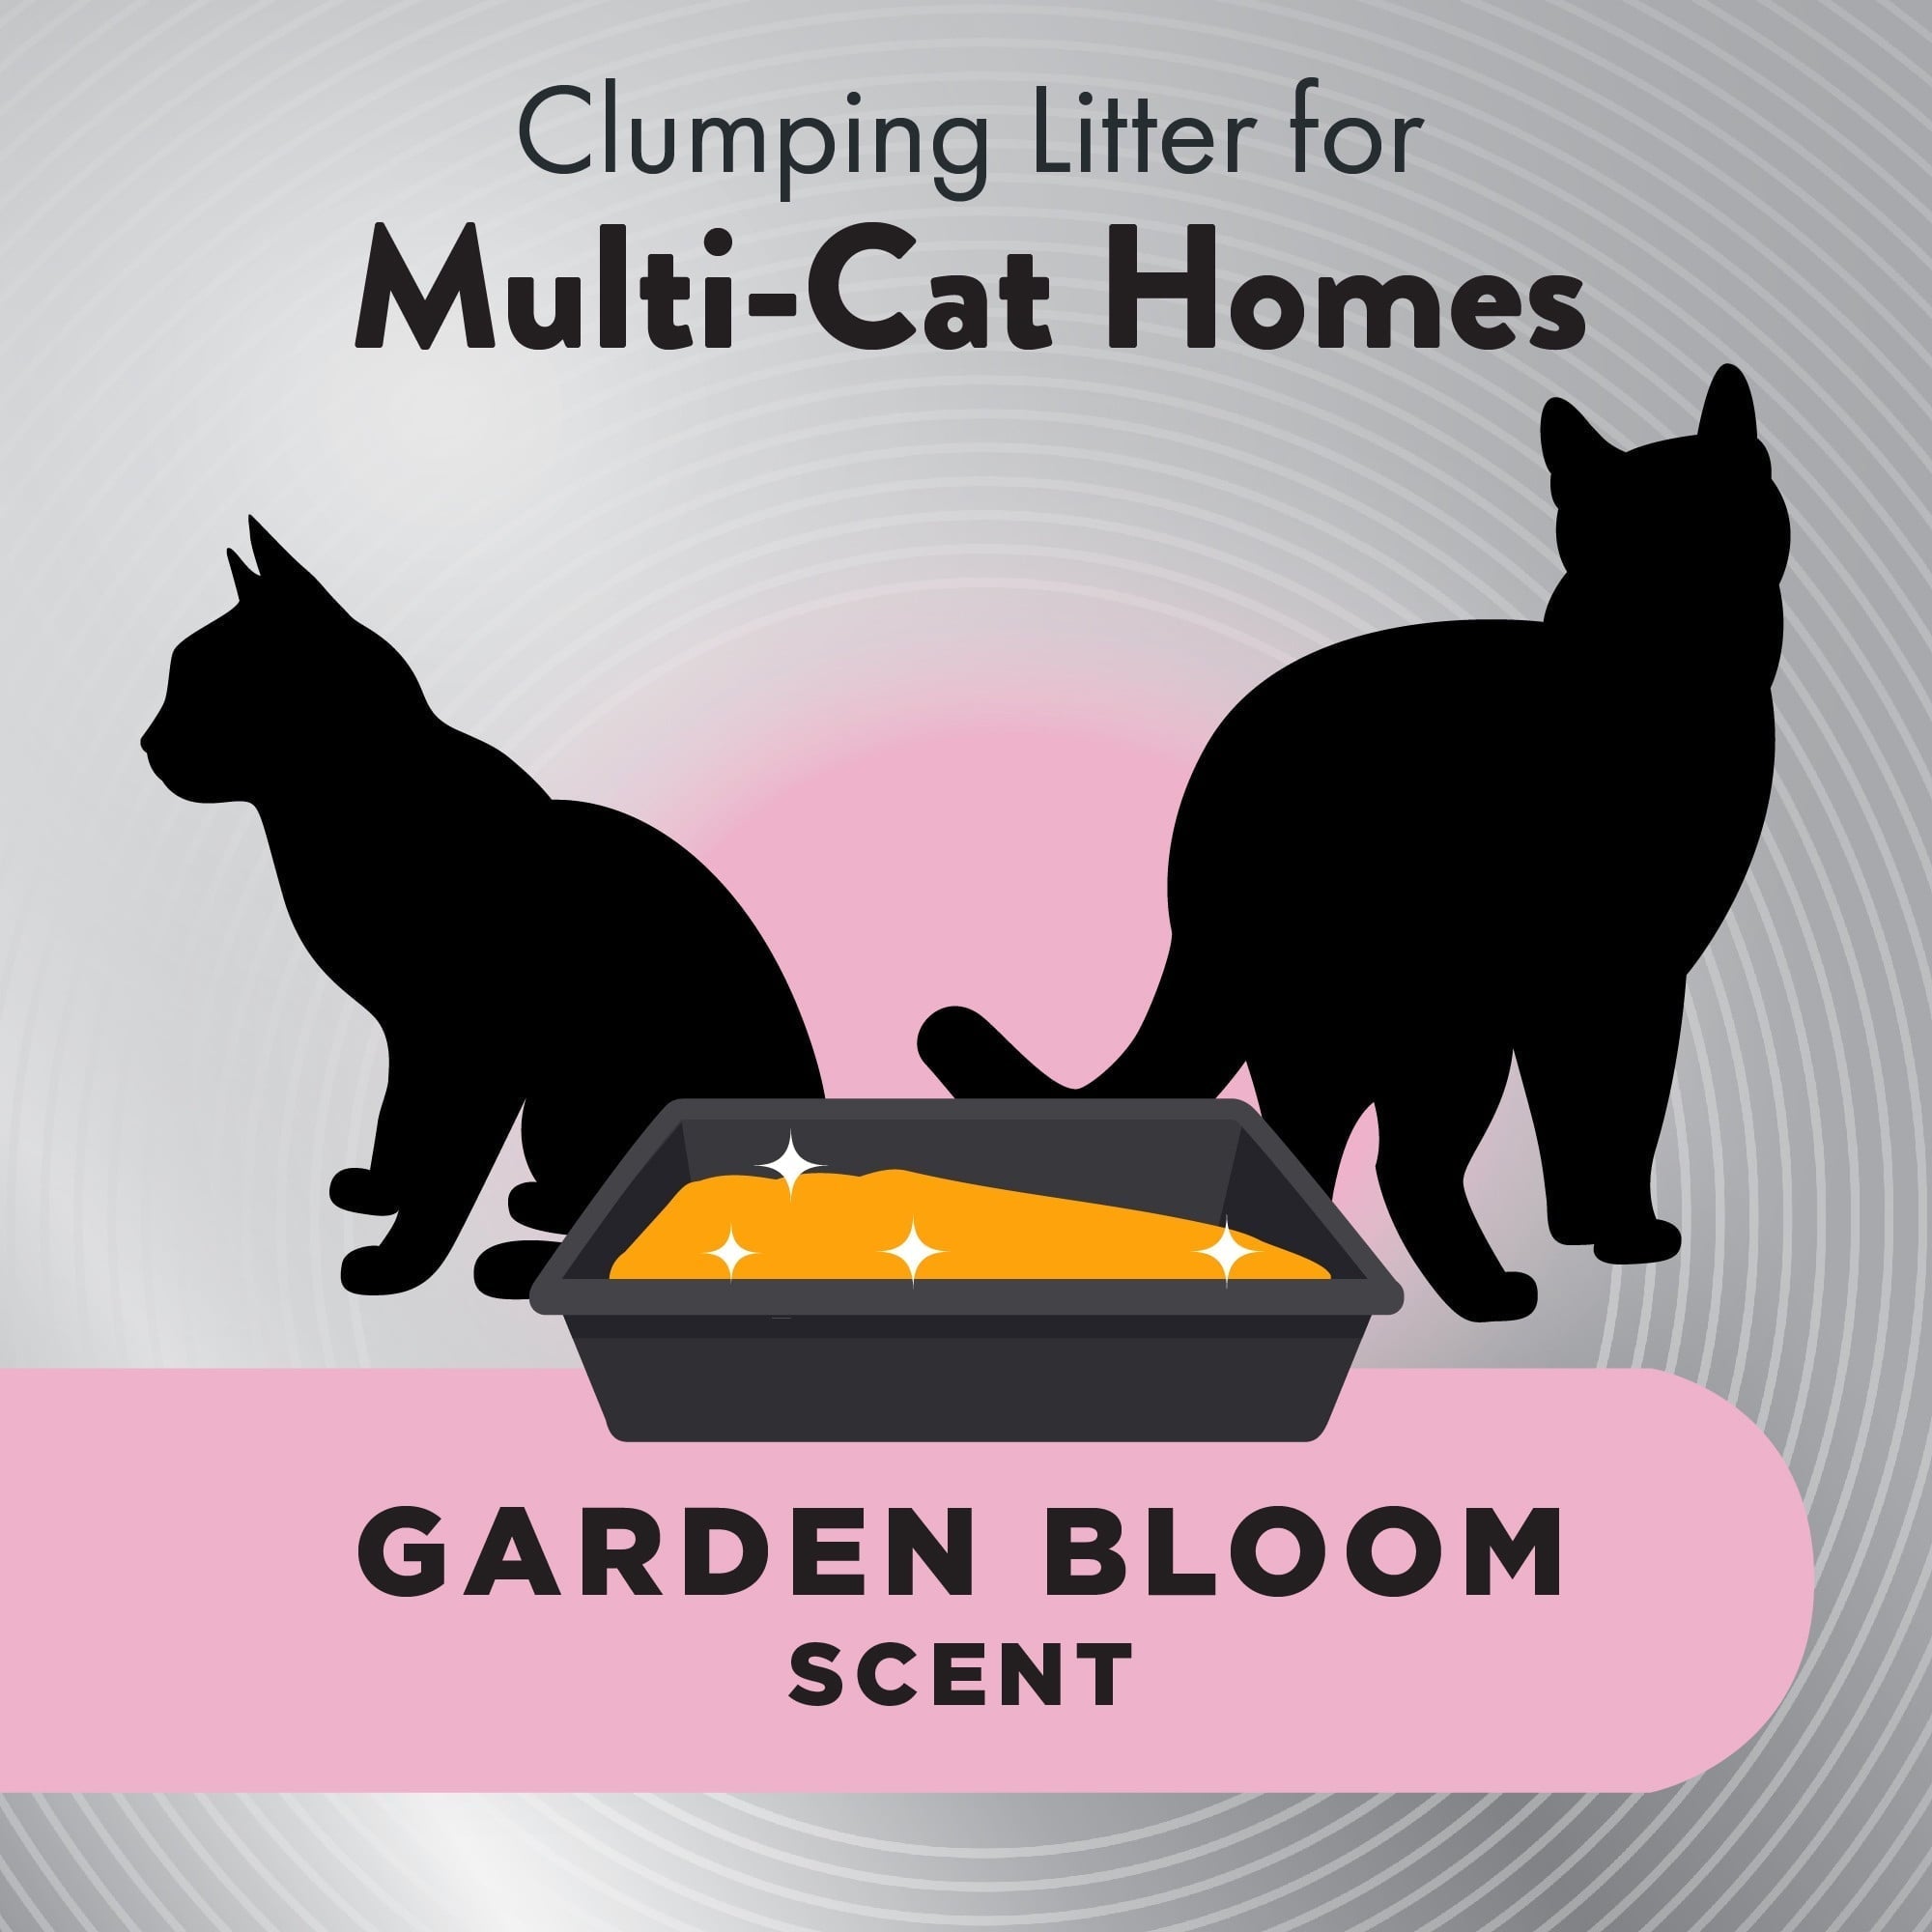 Wholesale prices with free shipping all over United States Arm & Hammer Hardball Lightweight Easy No-Mess Scooping Garden Bloom Scent Multi-Cat Clumping Litter, 7lb - Steven Deals